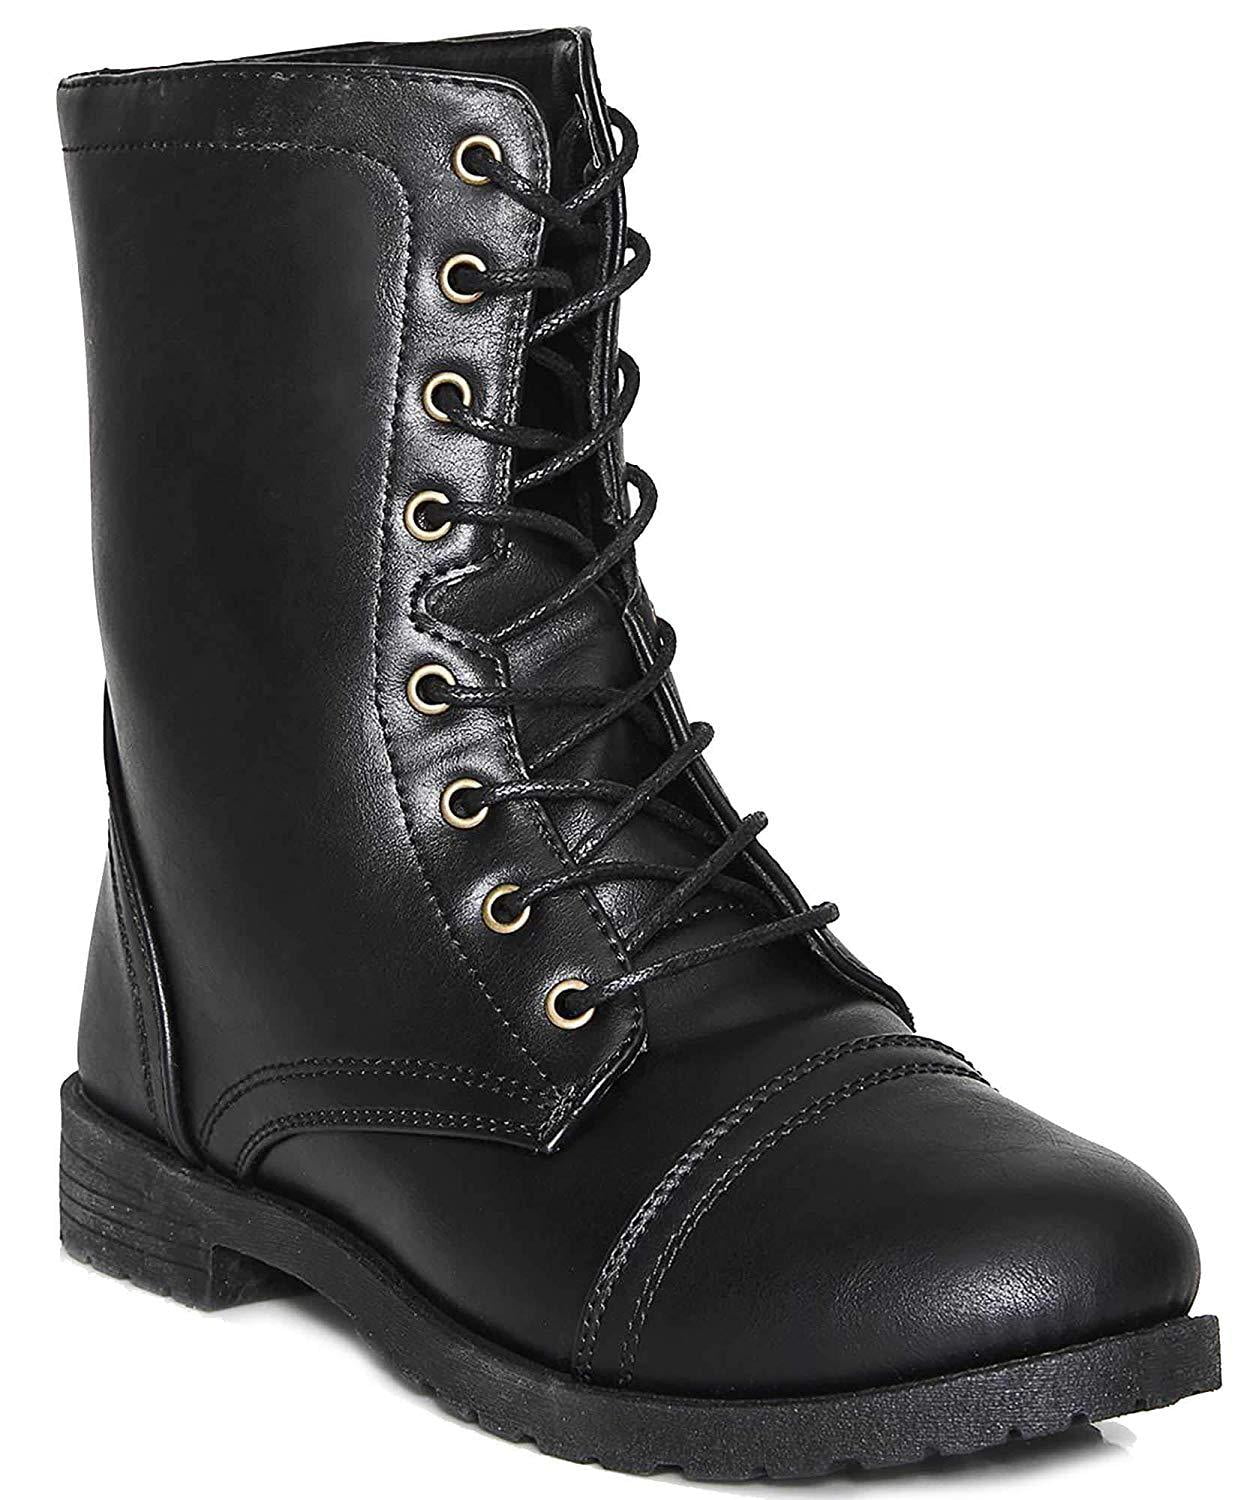 Lace up Military Style Combat Boots Women's Boots Vegan Leather Below ...